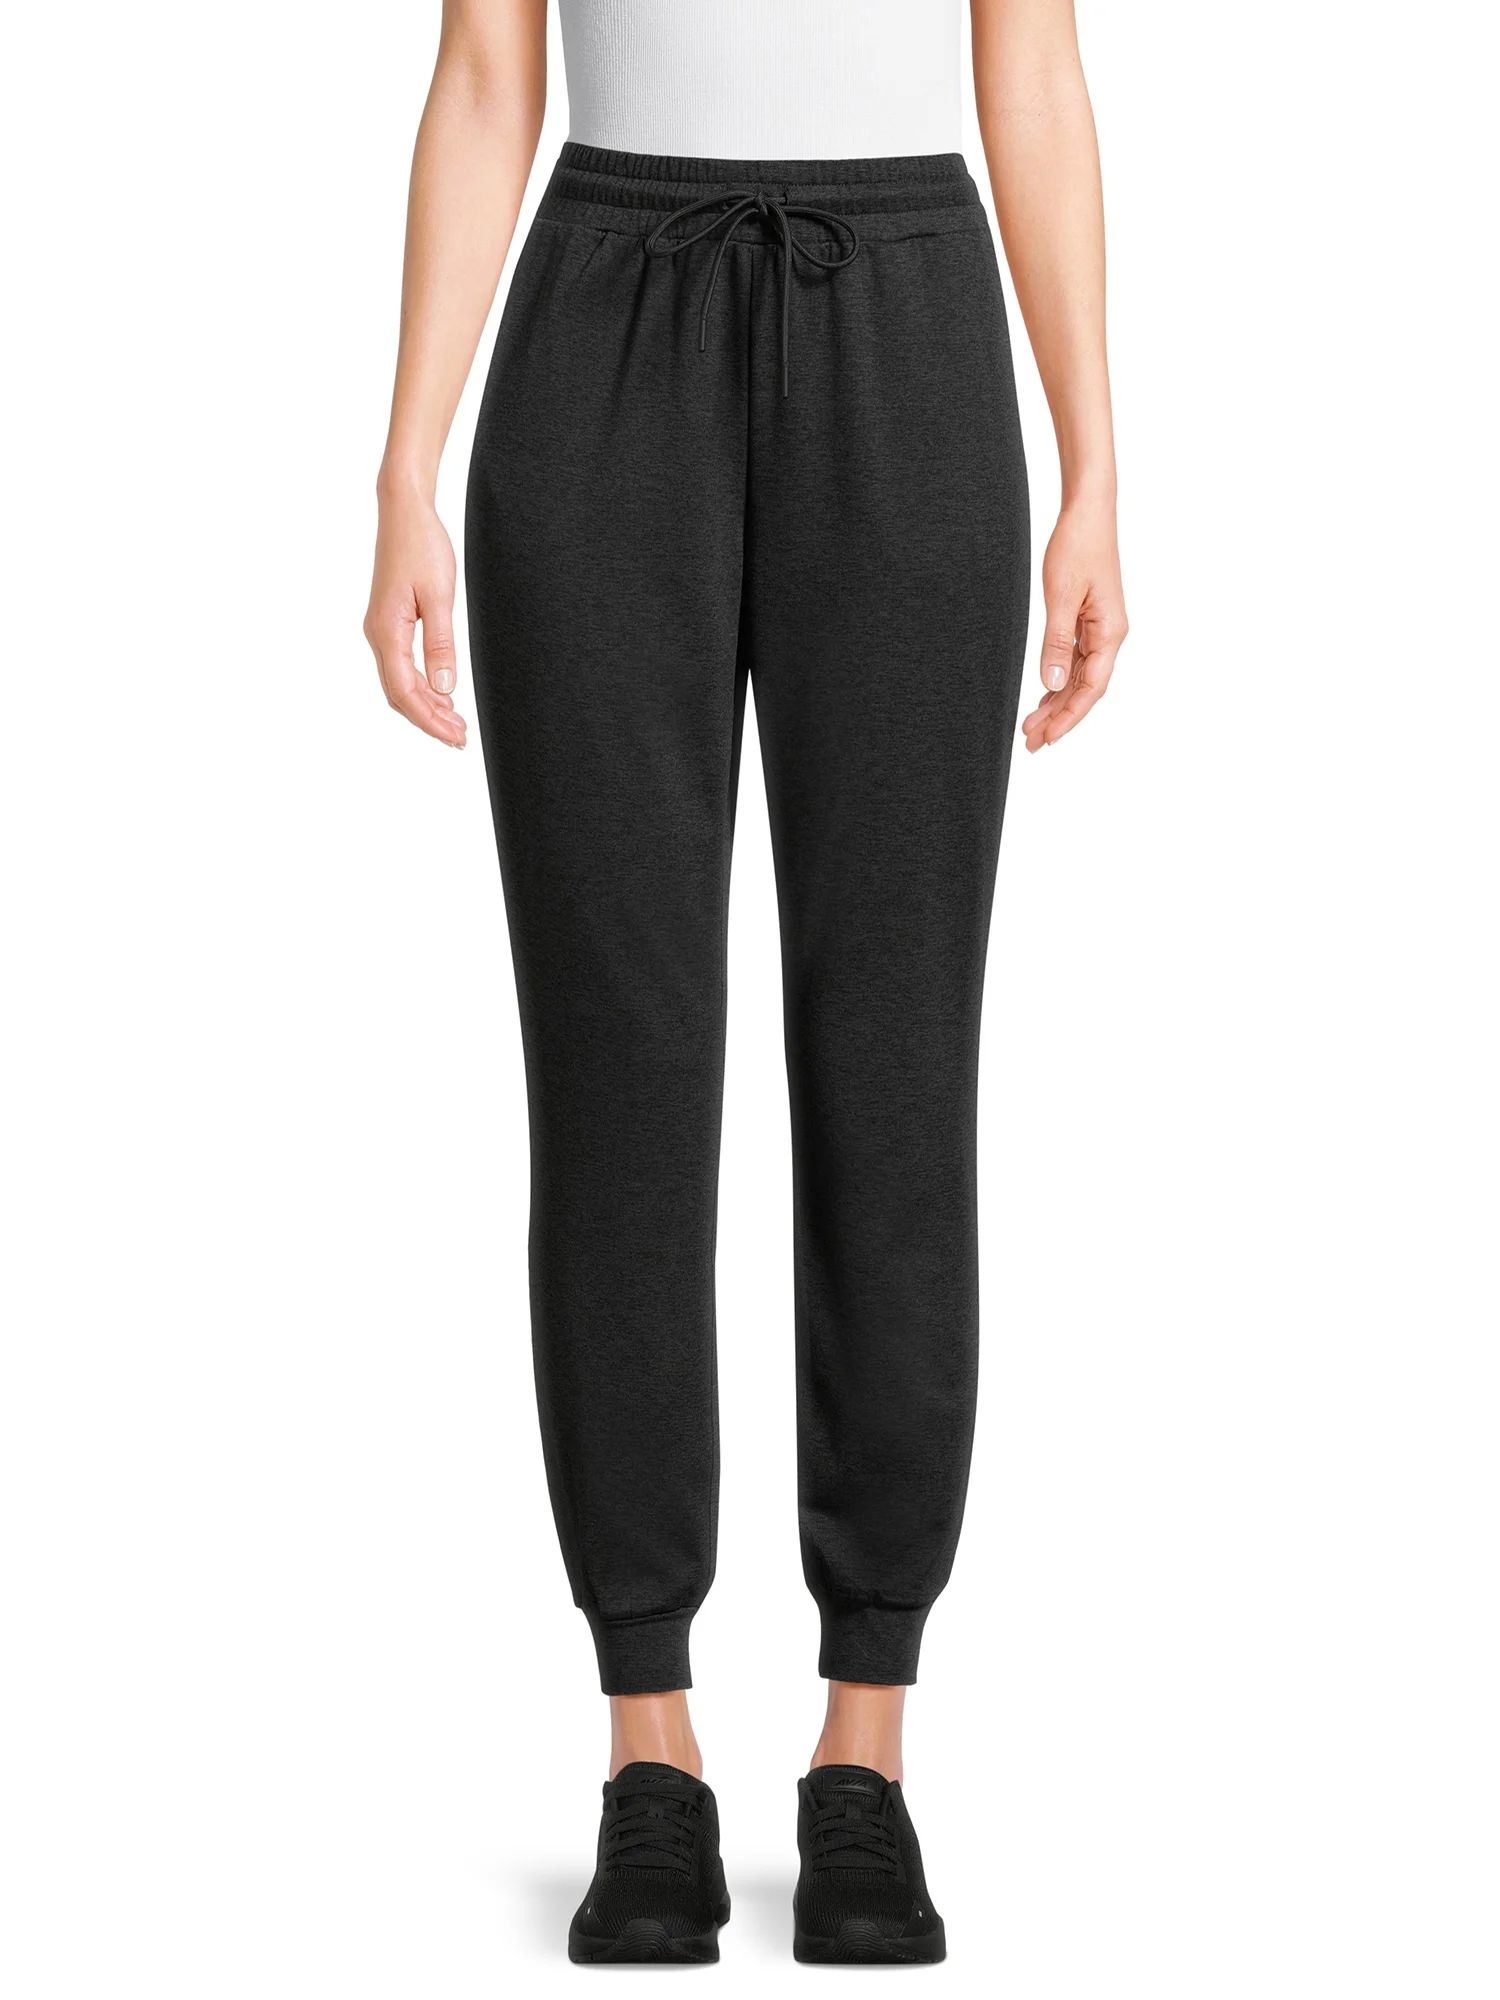 Athletic Works Women's and Women's Plus ButterCore Lightweight Joggers, Sizes XS-4X | Walmart (US)